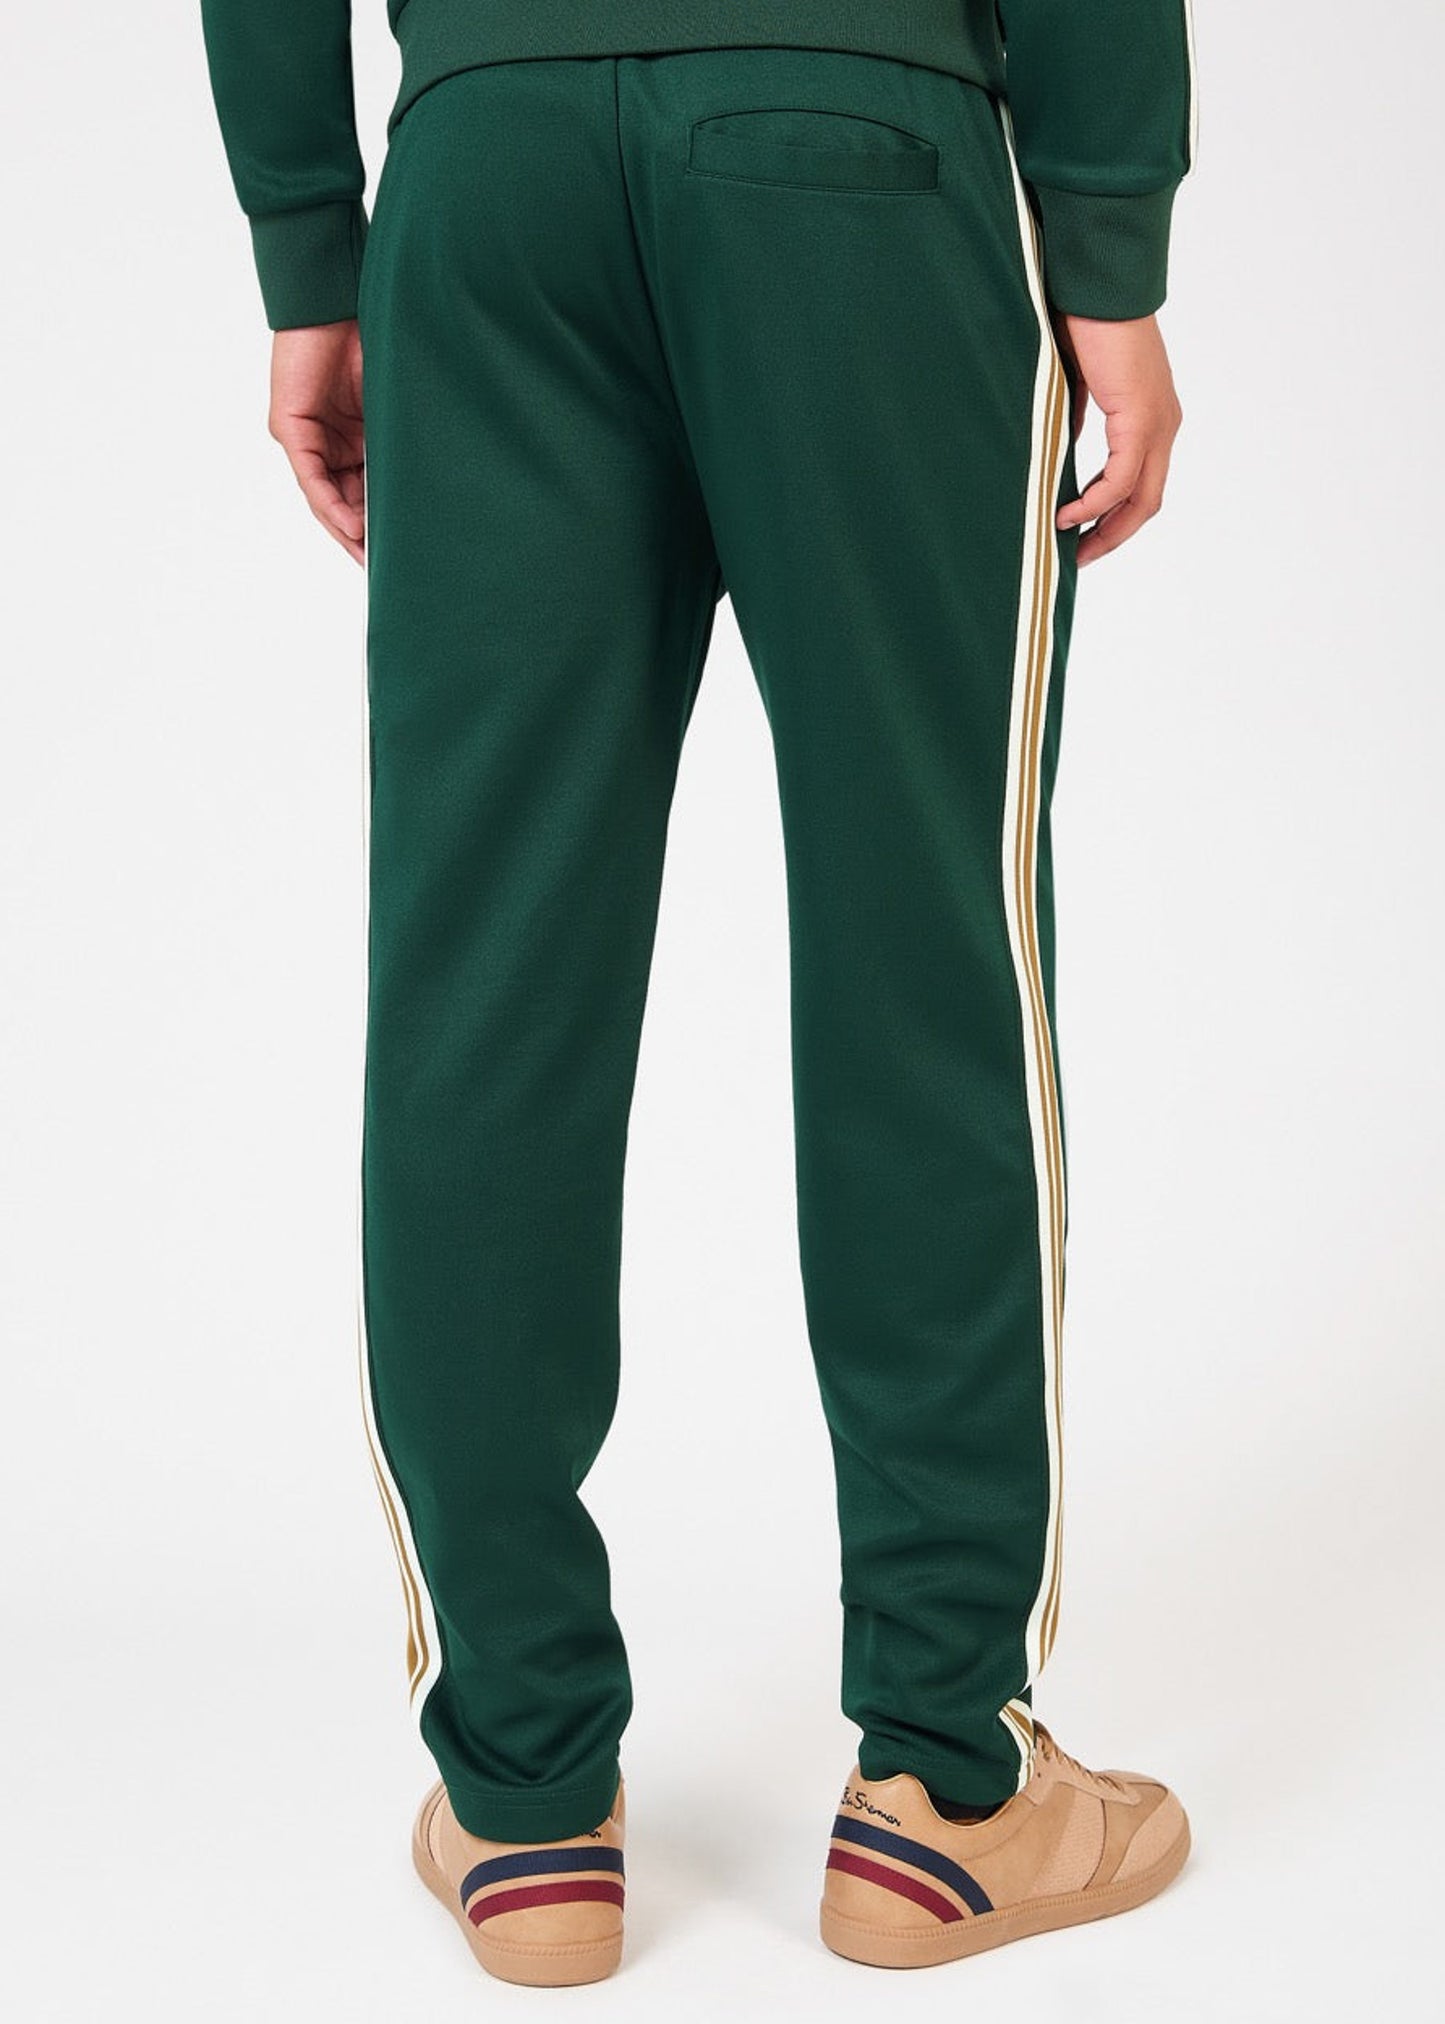 House taped track pant - dark green